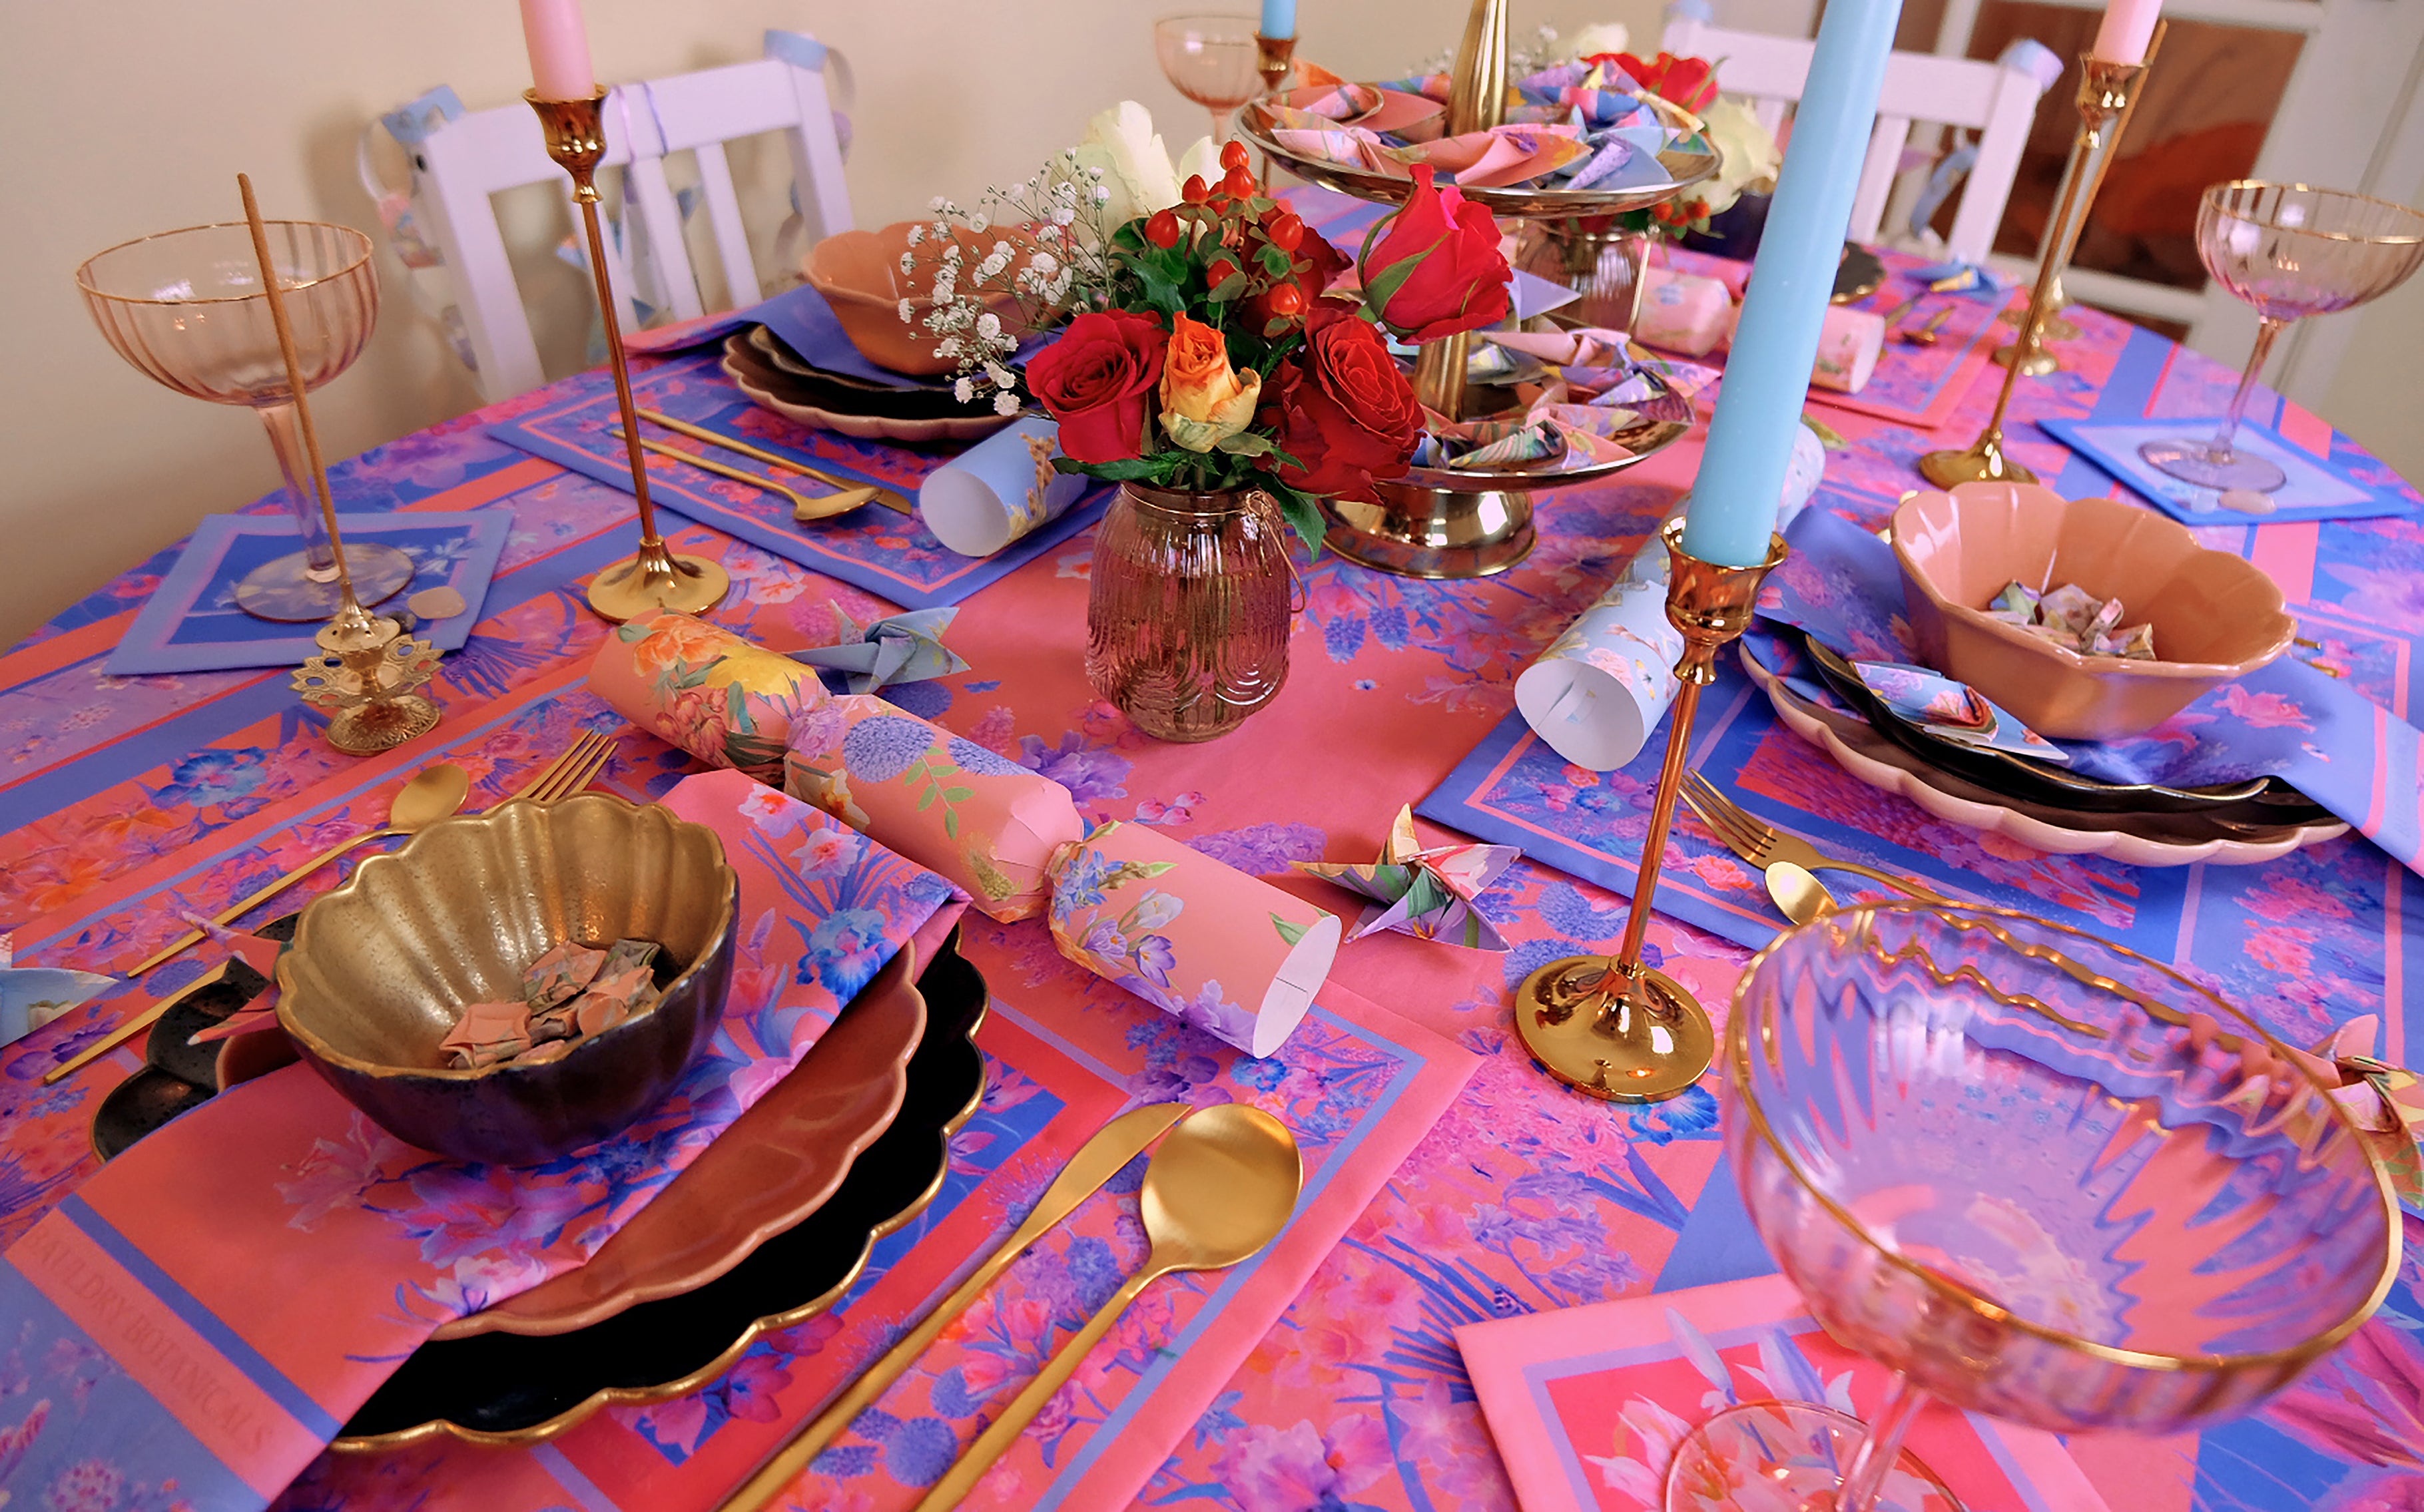 coasters, napkins and placemats in decorative colourful botanical designs for creative table settings